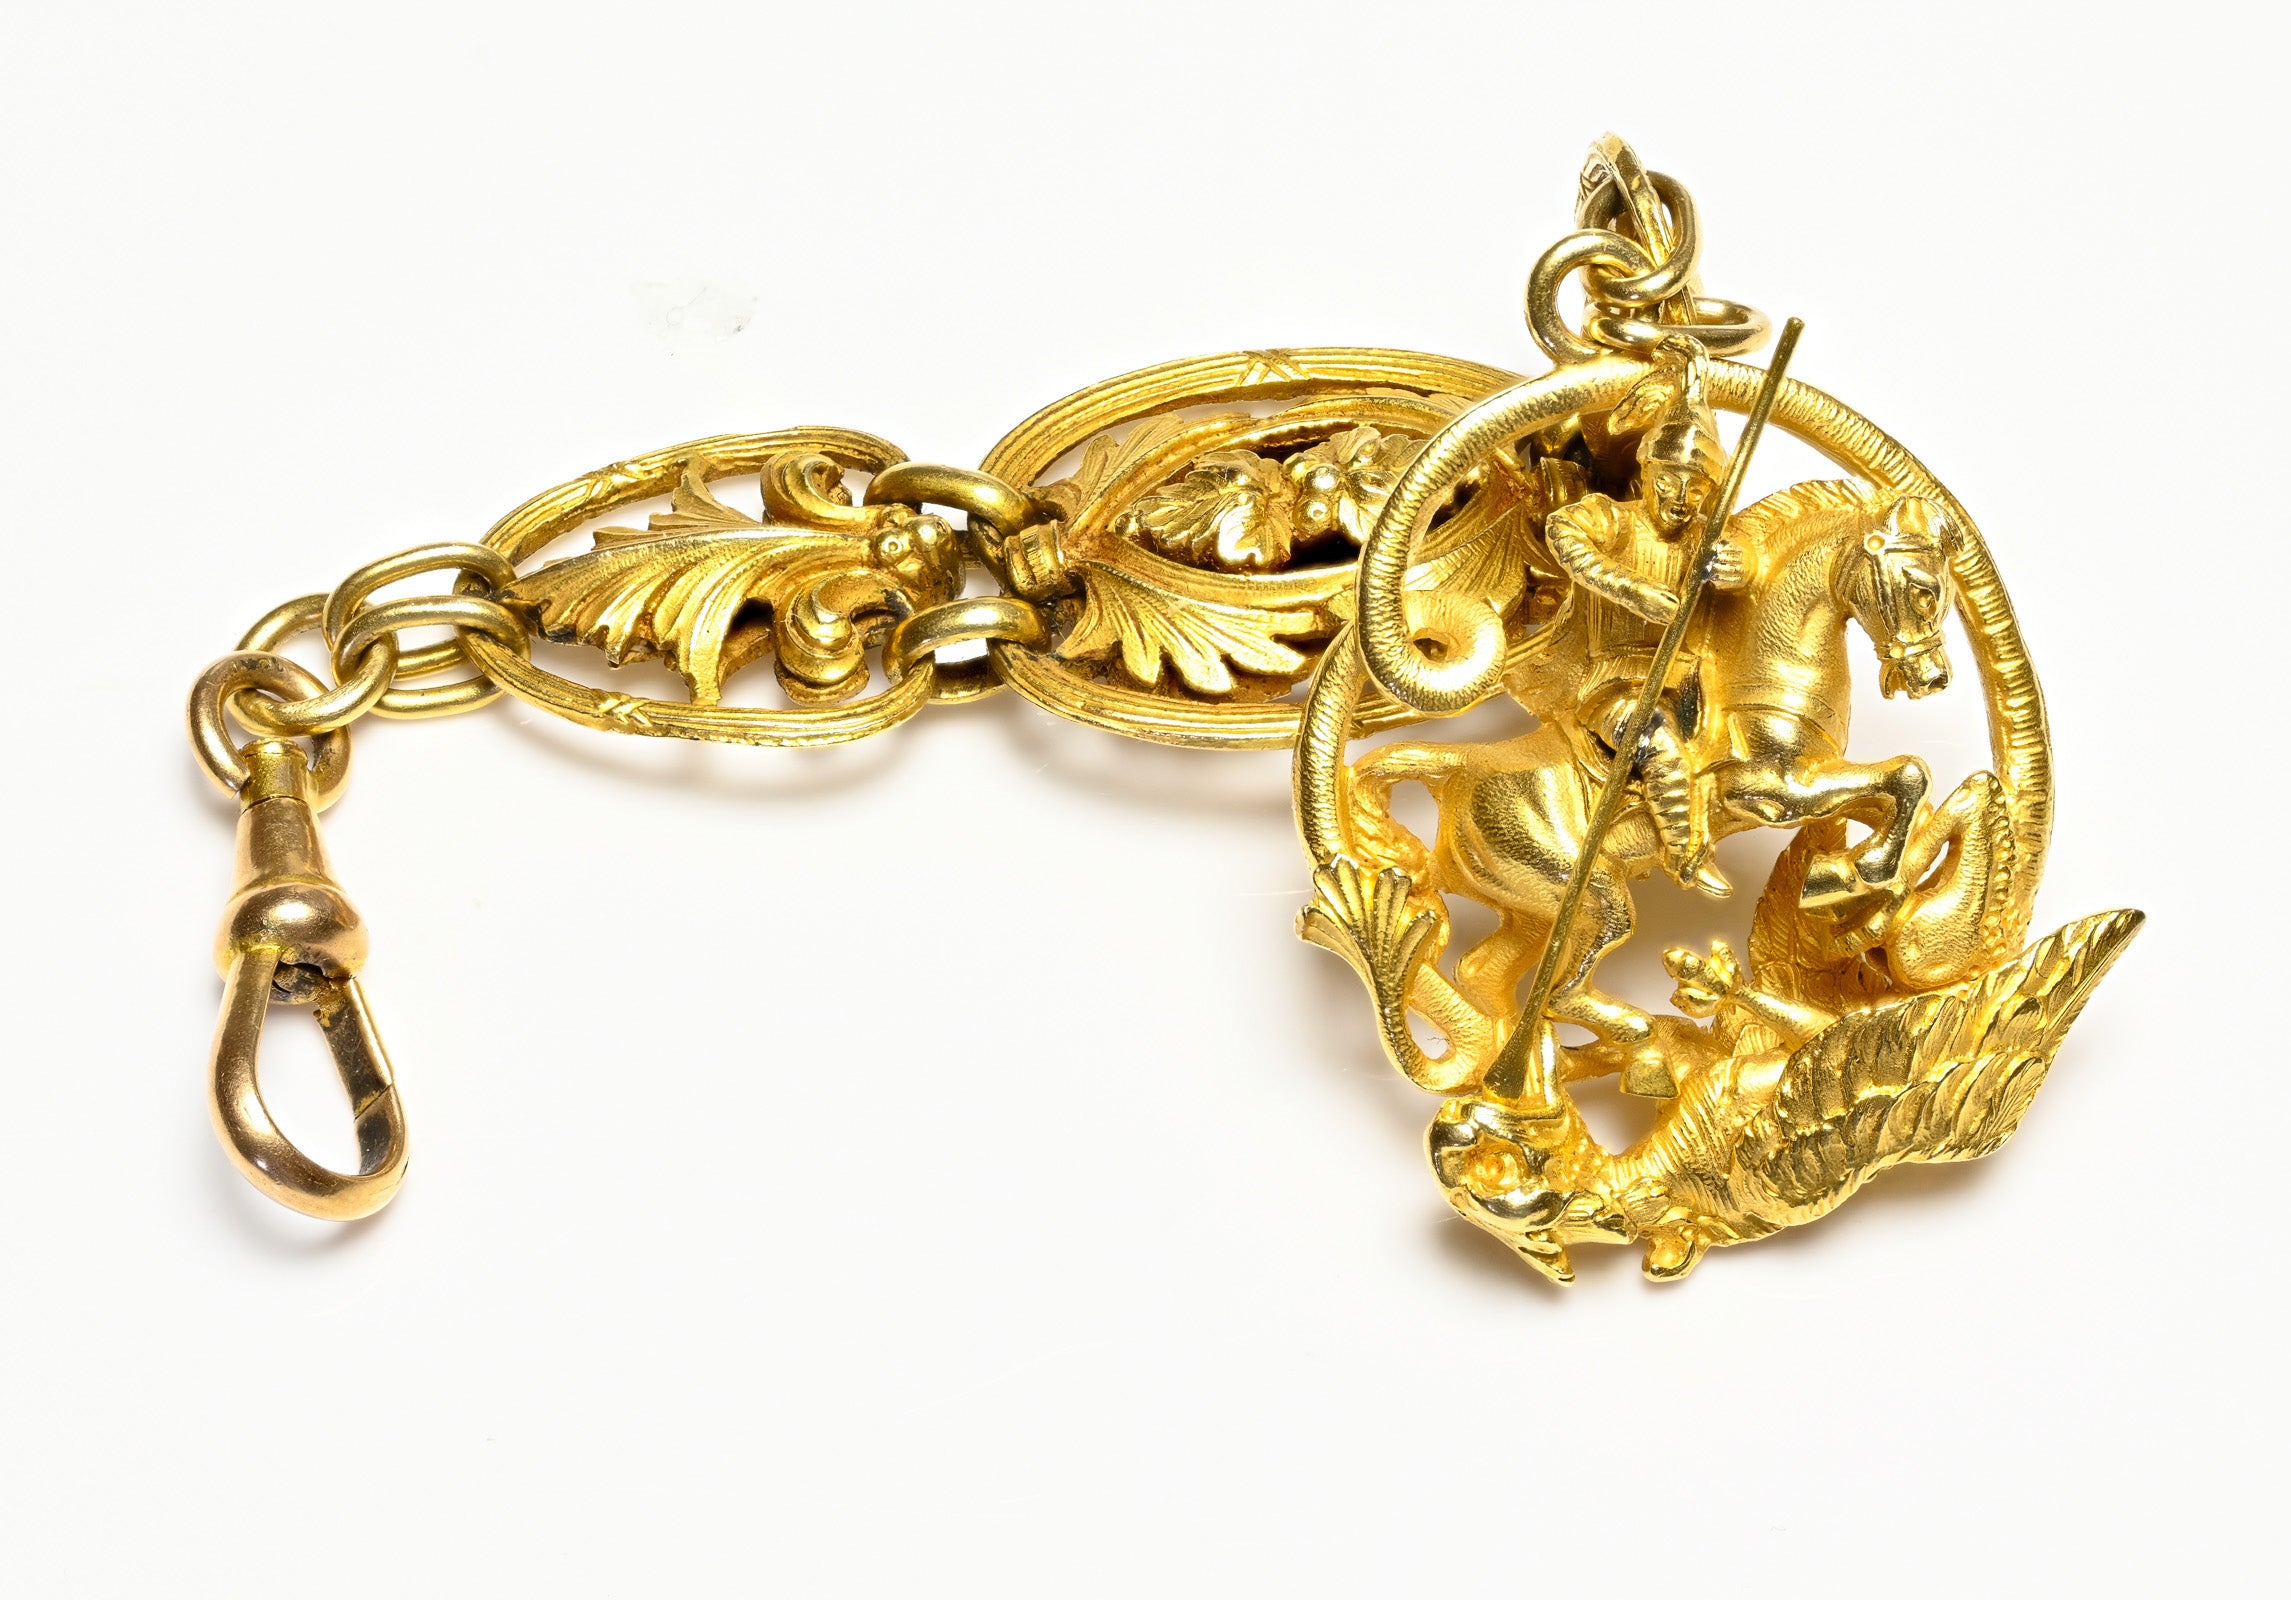 Antique Gold Saint George Slaying the Dragon Fob